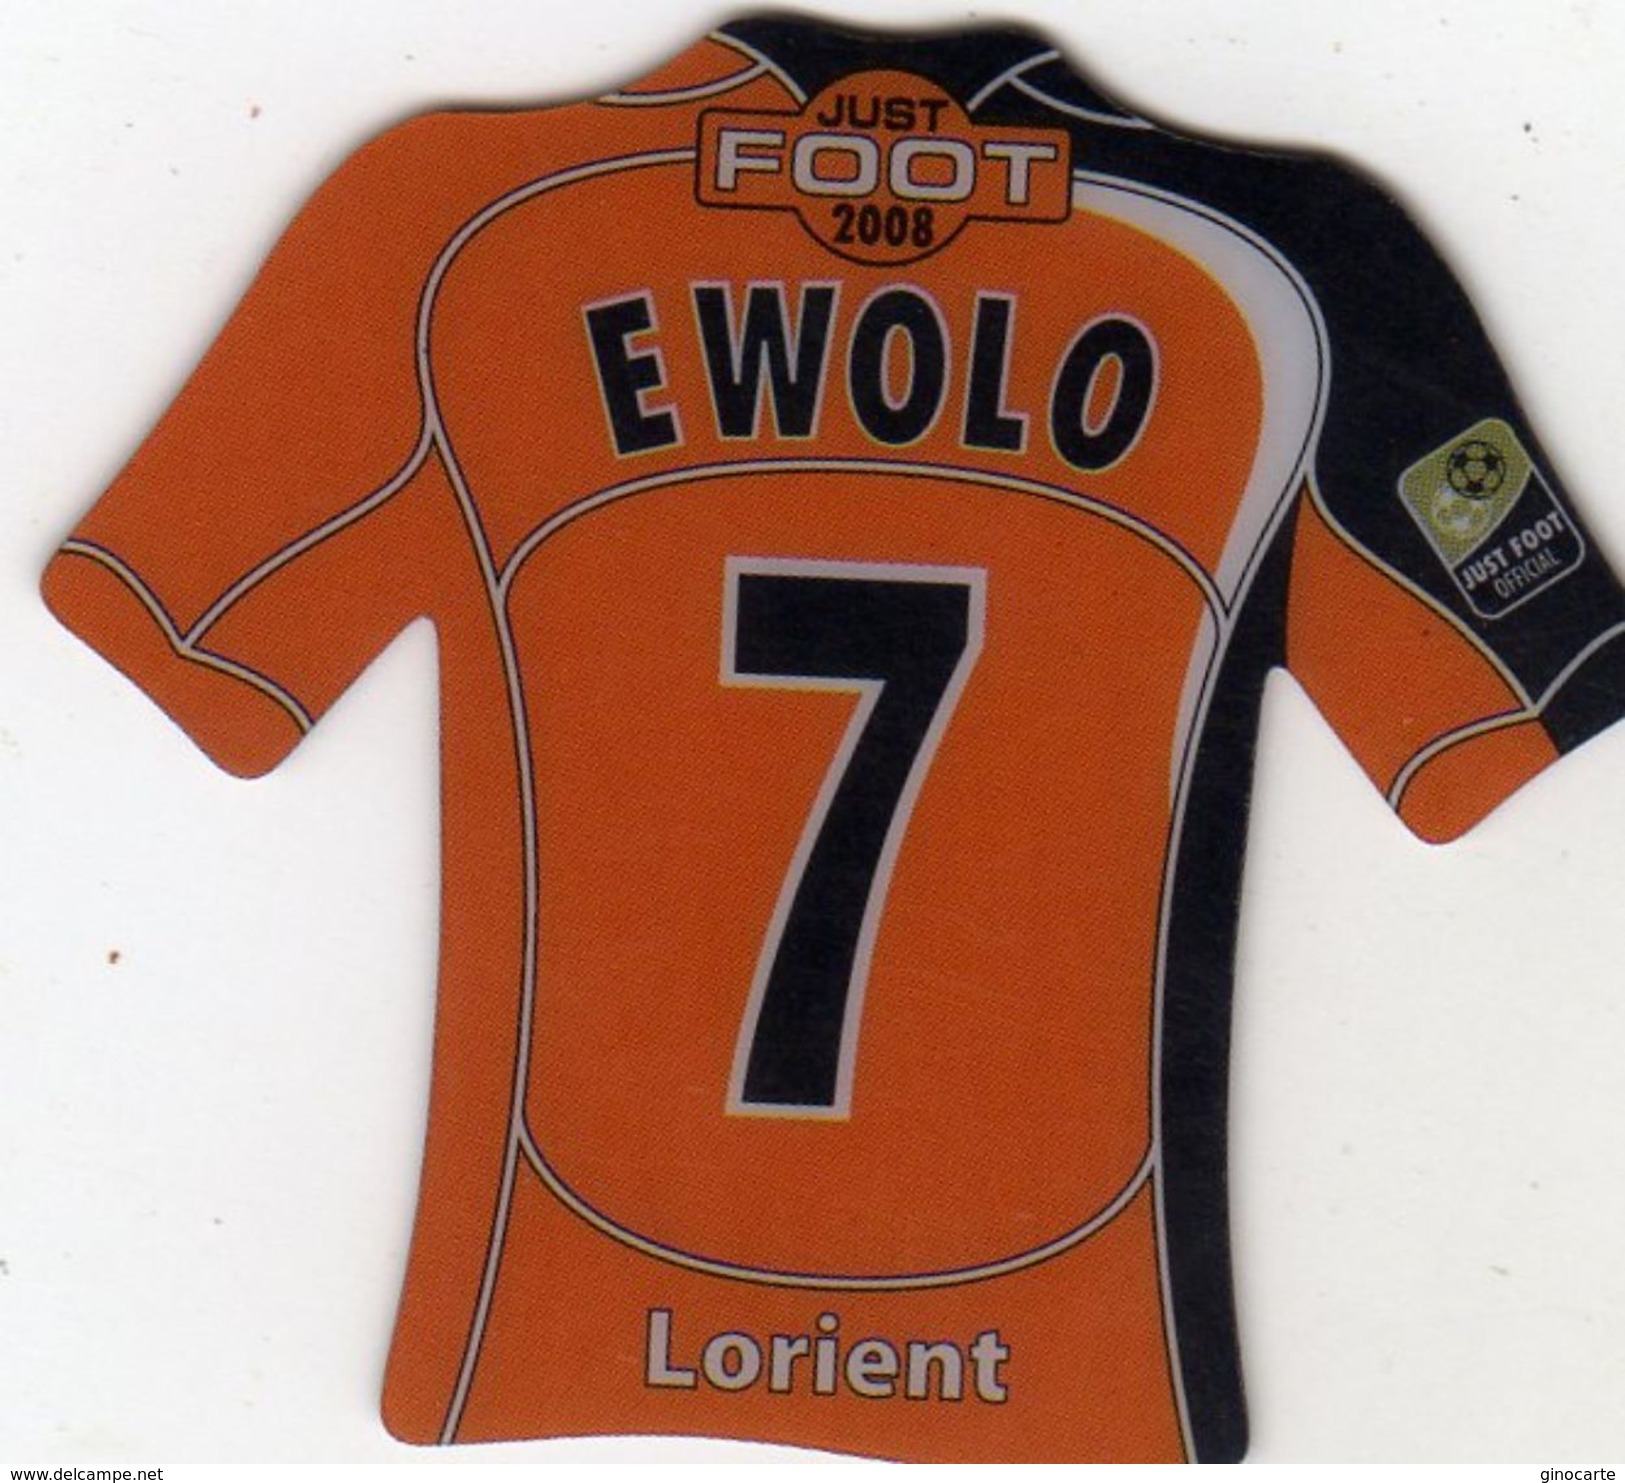 Magnet Magnets Maillot De Football Pitch Lorient Ewolo 2008 - Sports